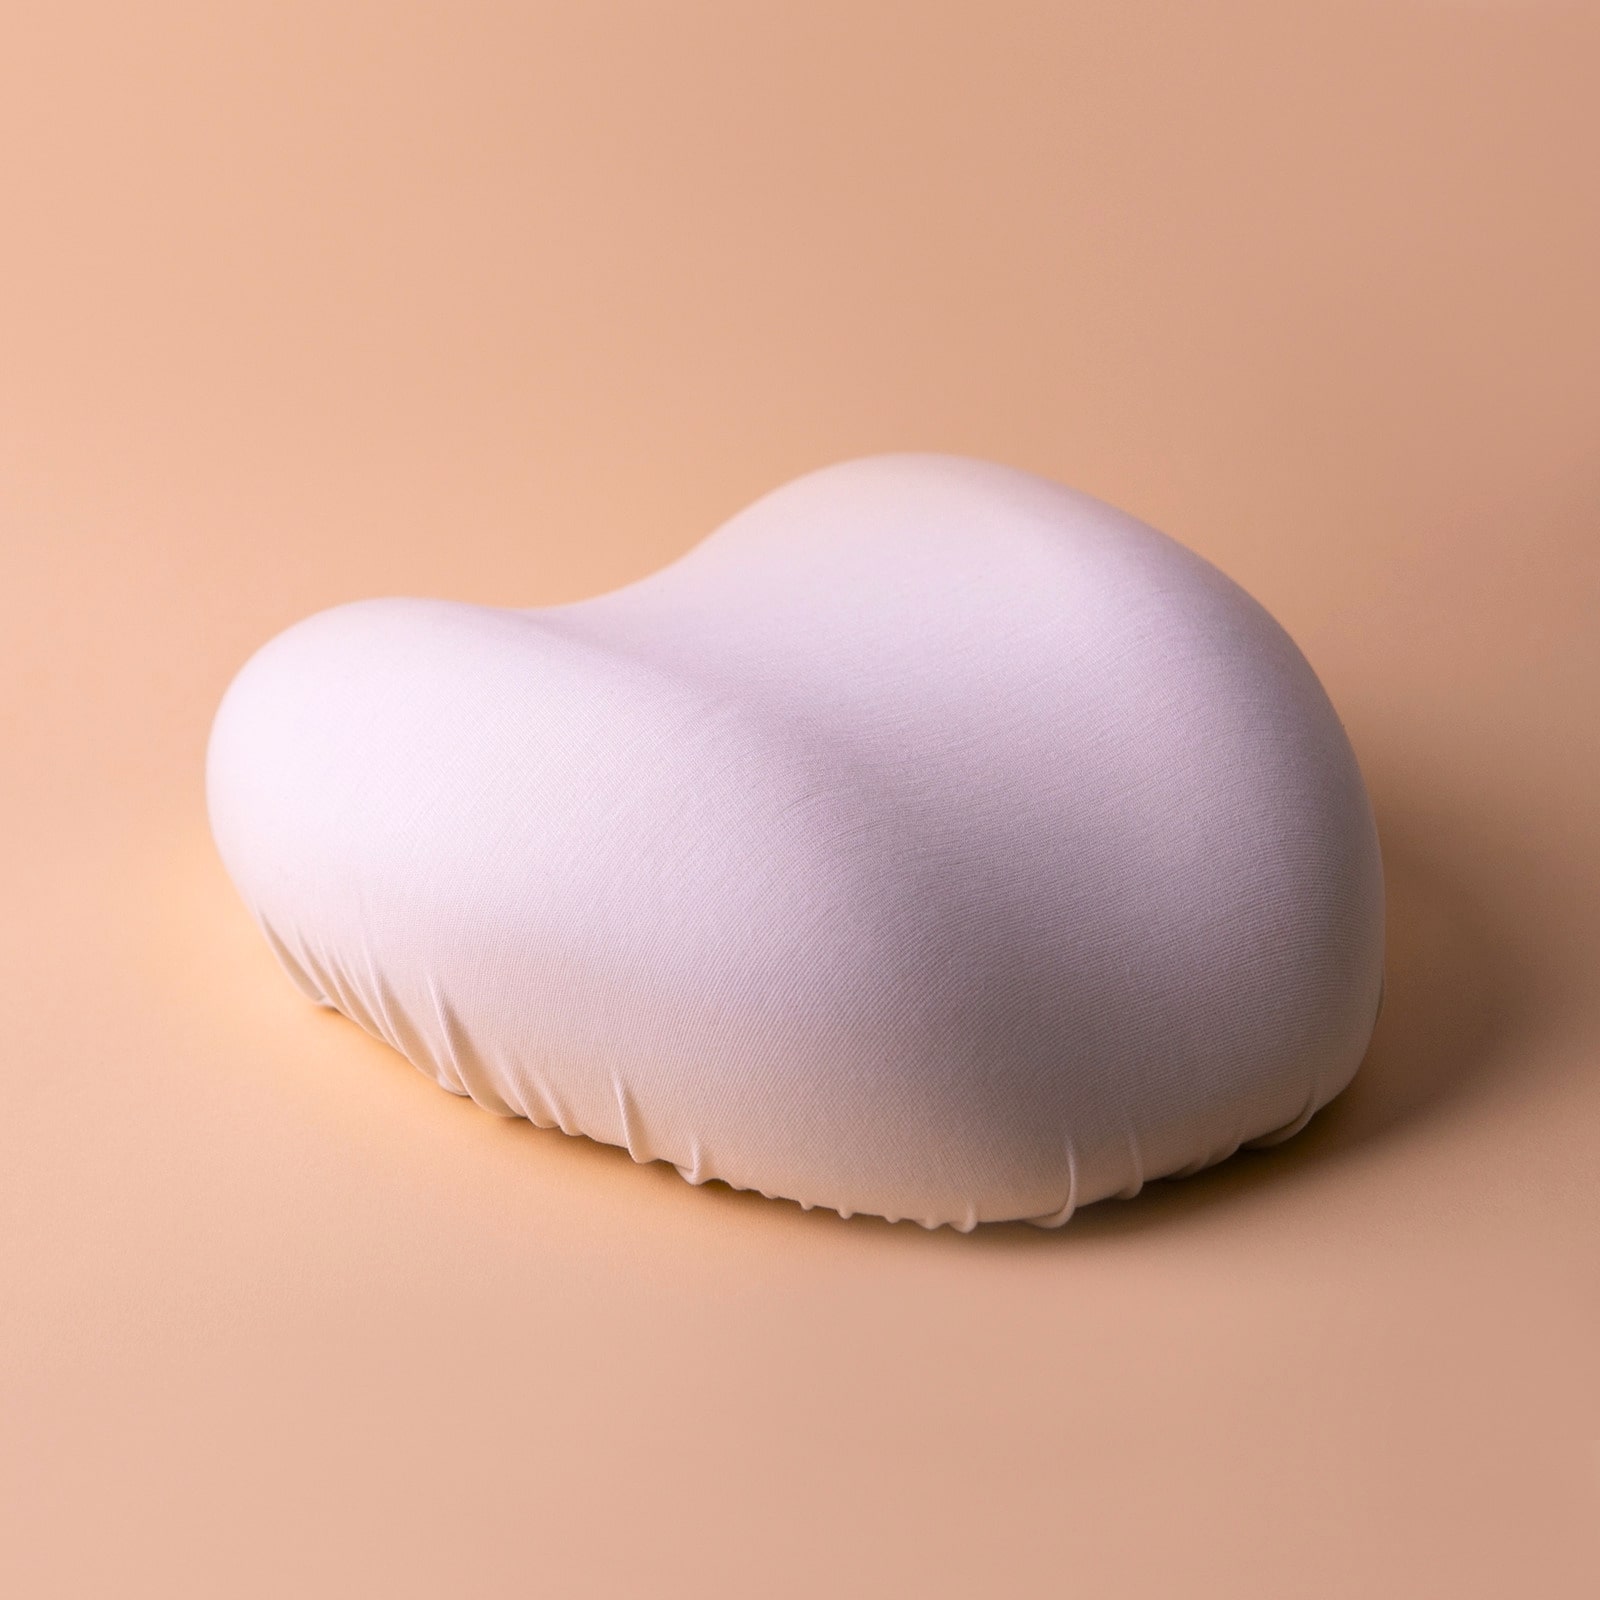 Soft pillow made out of flexible fabric and filled with foam